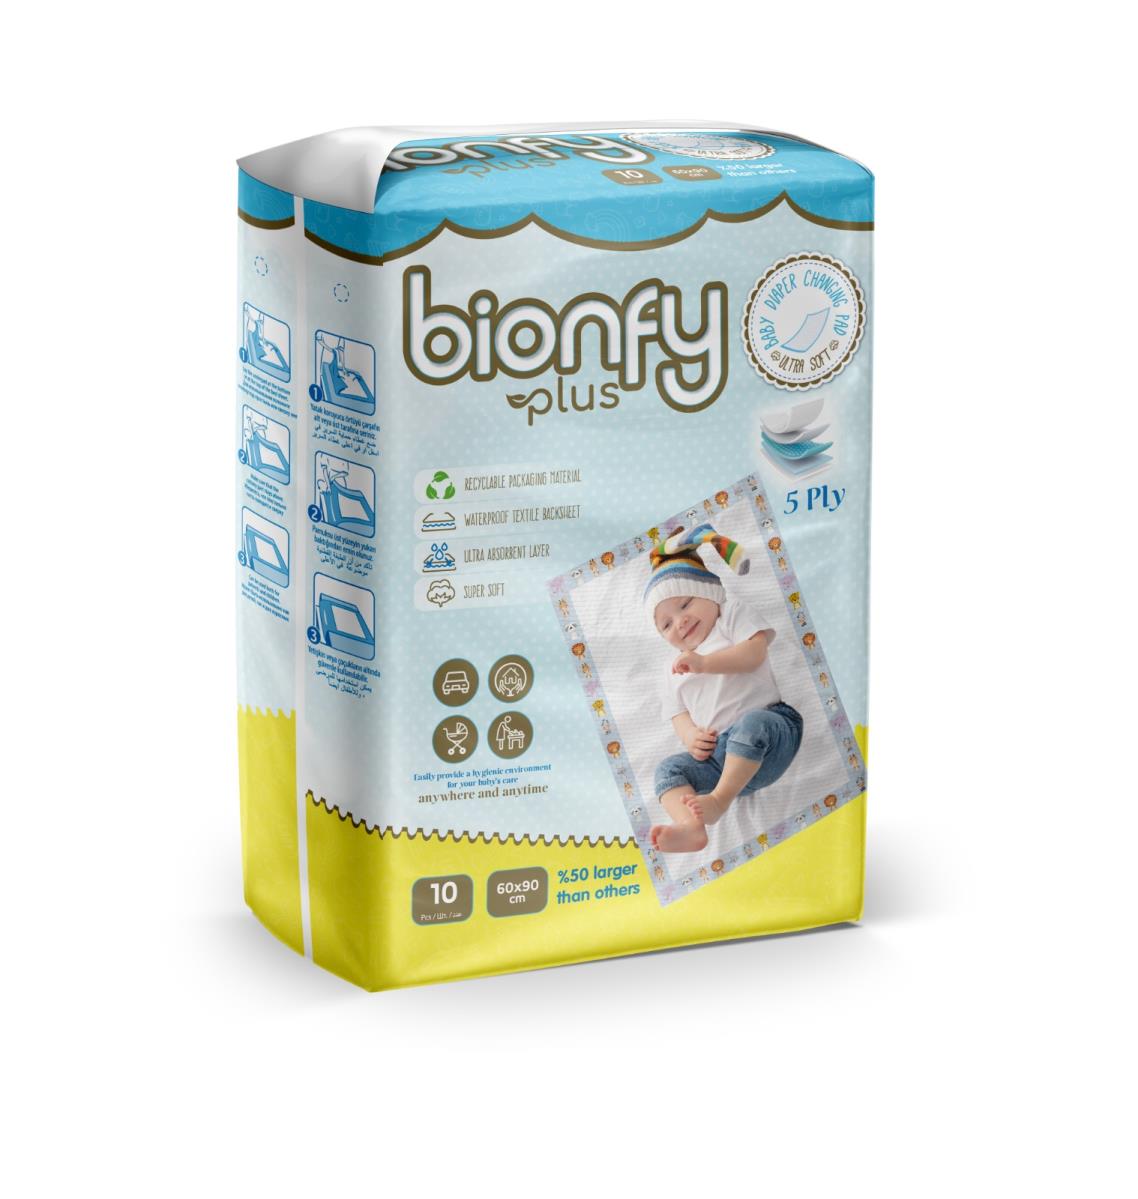 BIONFY BABY DIAPER CHANGING PADS